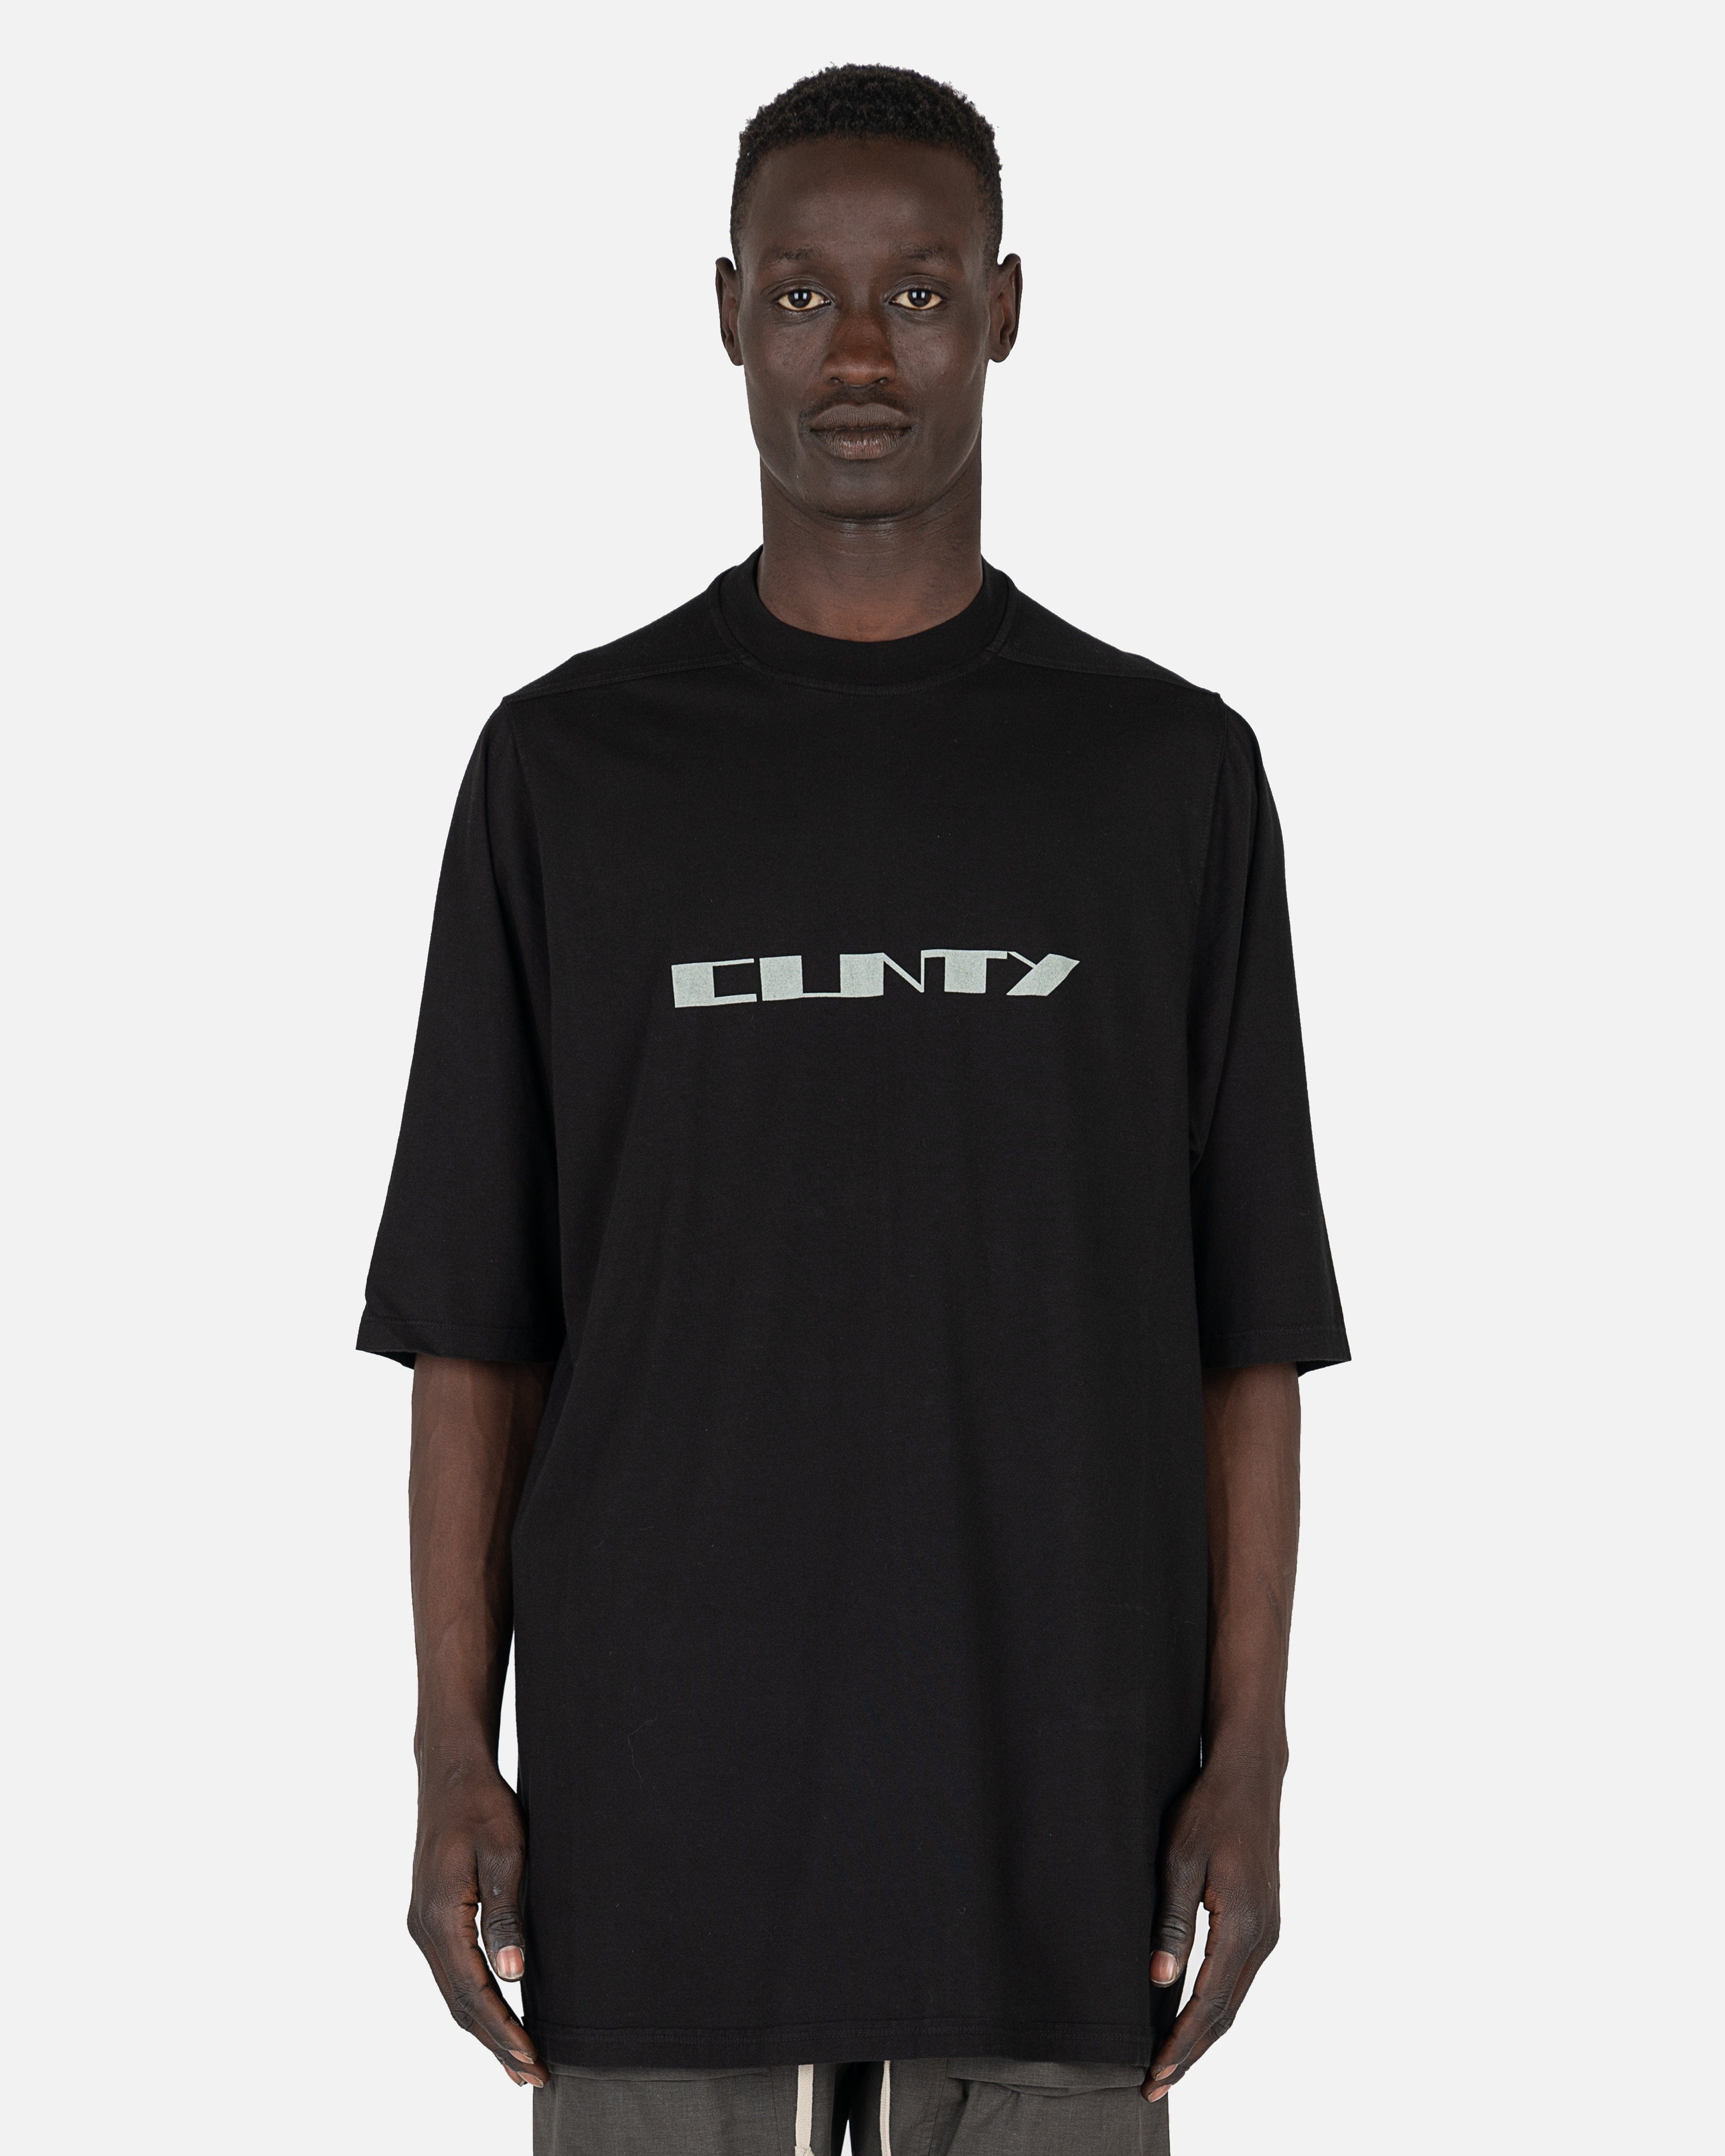 Jumbo SS T-Shirt in Black/Oyster